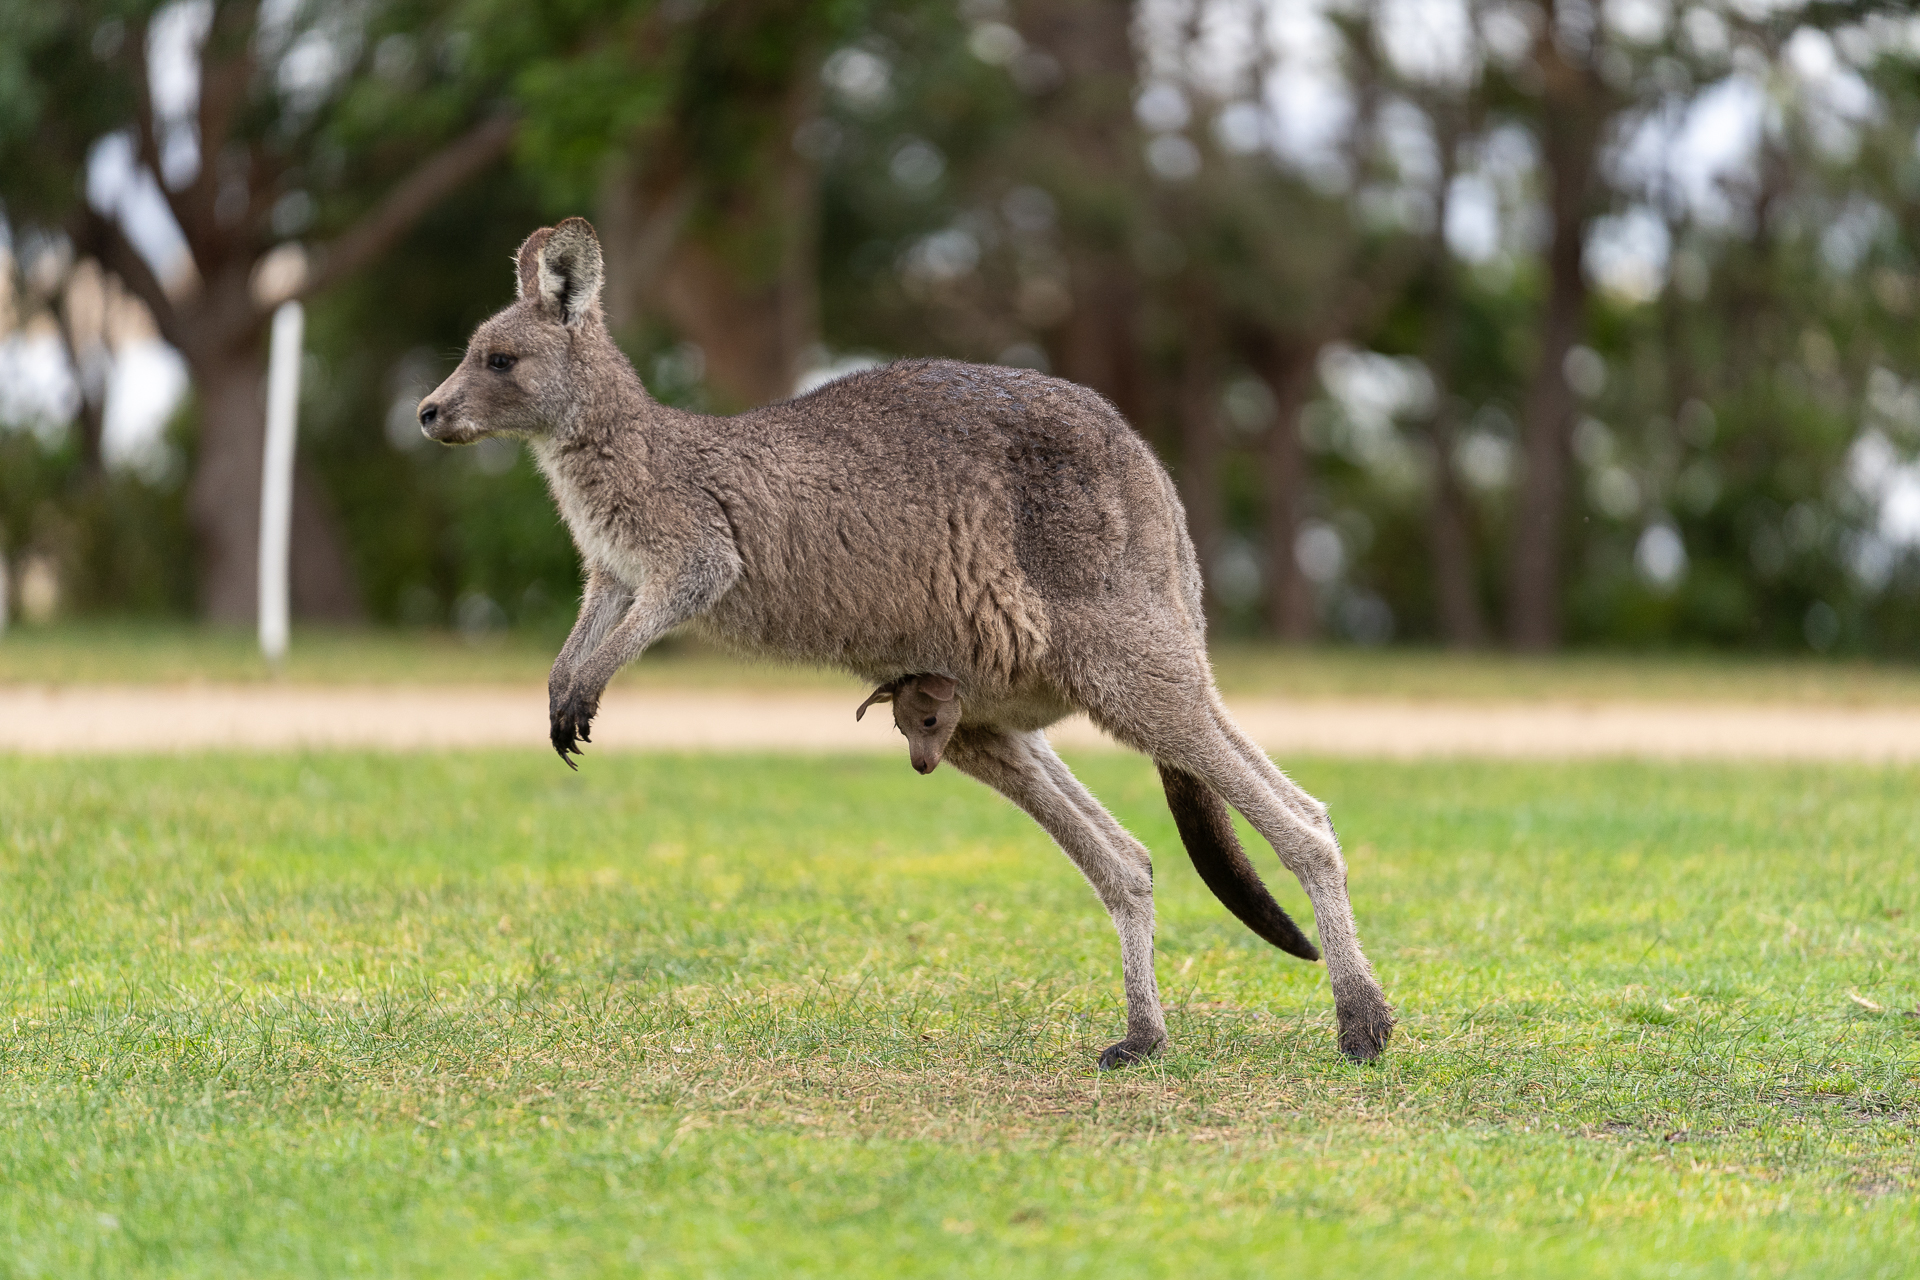 A kangaroo jumping carrying a baby in the belly in a grass field